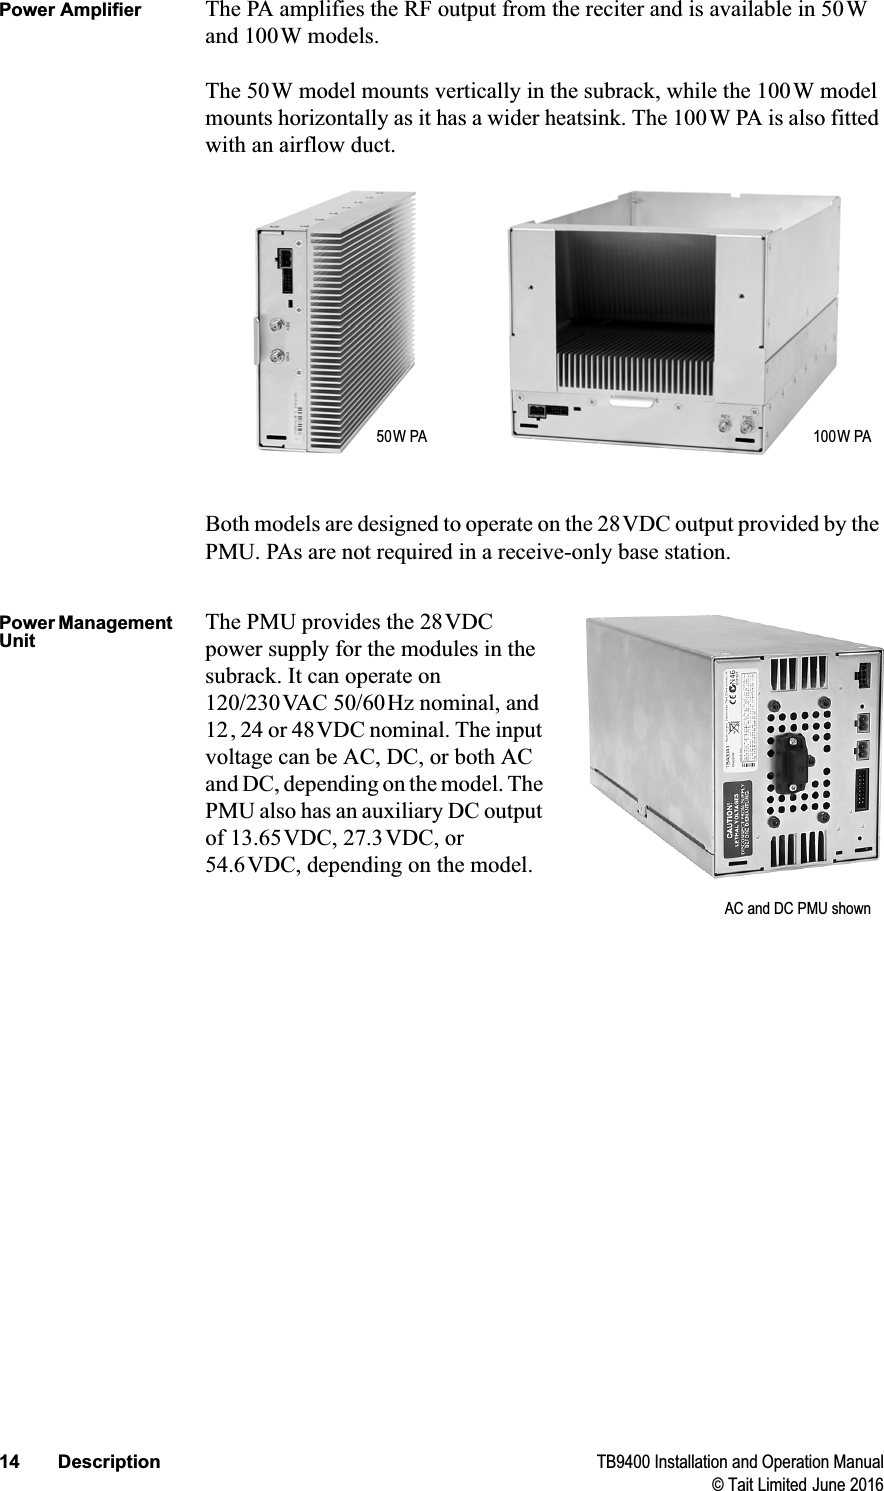 14 Description TB9400 Installation and Operation Manual© Tait Limited June 2016Power Amplifier The PA amplifies the RF output from the reciter and is available in 50W and 100W models.The 50W model mounts vertically in the subrack, while the 100W model mounts horizontally as it has a wider heatsink. The 100W PA is also fitted with an airflow duct.Both models are designed to operate on the 28VDC output provided by the PMU. PAs are not required in a receive-only base station.Power Management UnitThe PMU provides the 28VDC power supply for the modules in the subrack. It can operate on 120/230VAC 50/60Hz nominal, and 12, 24 or 48VDC nominal. The input voltage can be AC, DC, or both AC and DC, depending on the model. The PMU also has an auxiliary DC output of 13.65VDC, 27.3VDC, or 54.6VDC, depending on the model.50W PA 100W PAAC and DC PMU shown